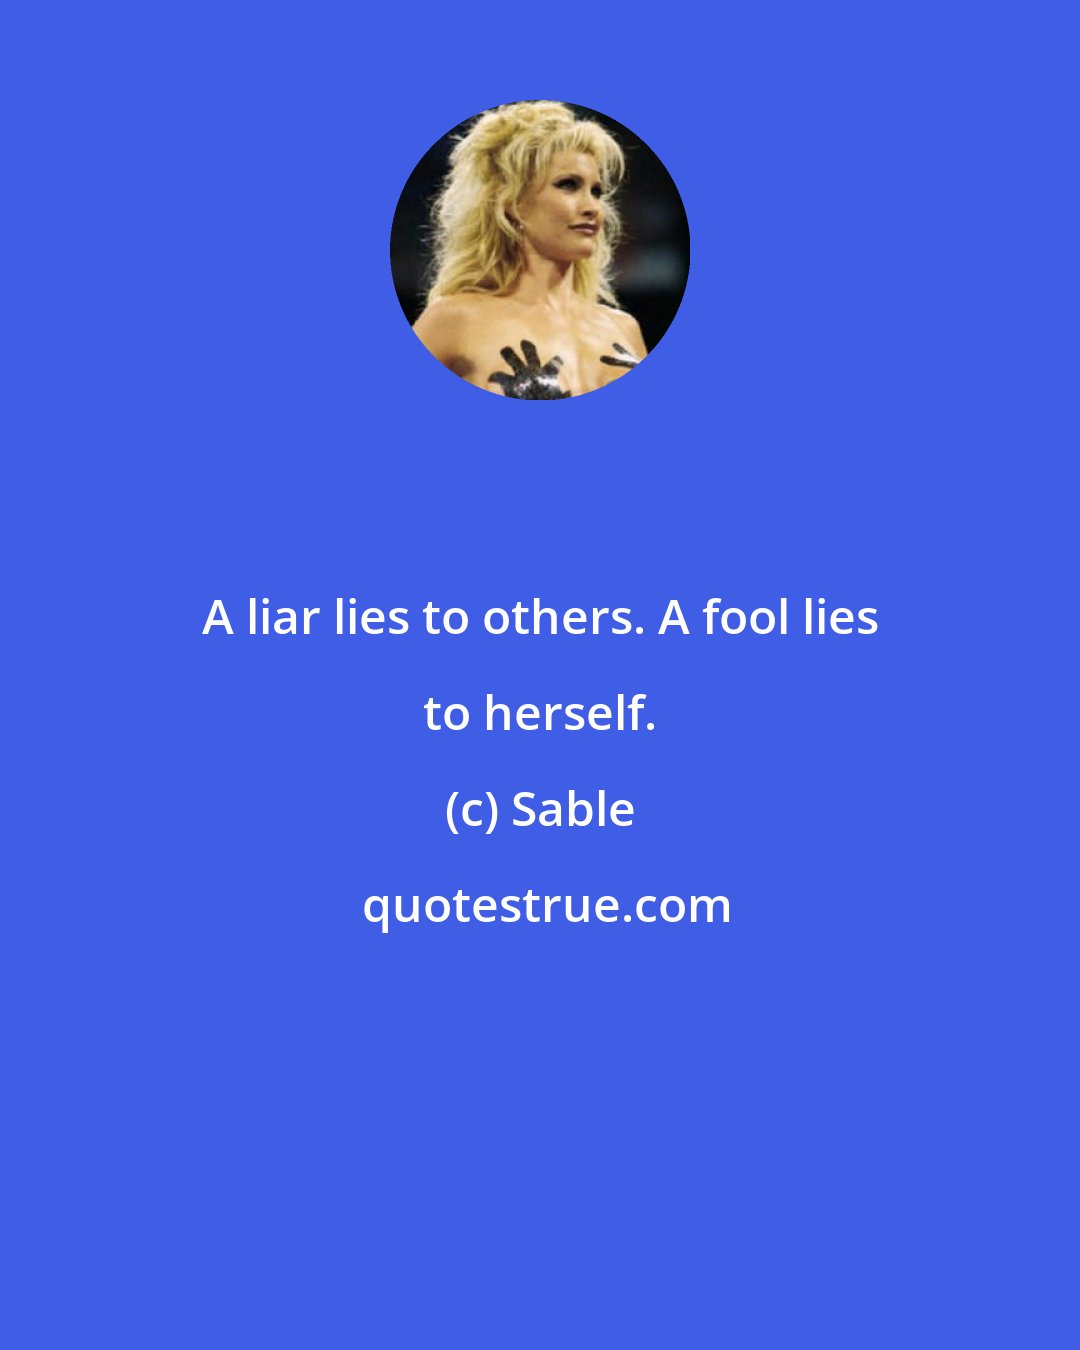 Sable: A liar lies to others. A fool lies to herself.